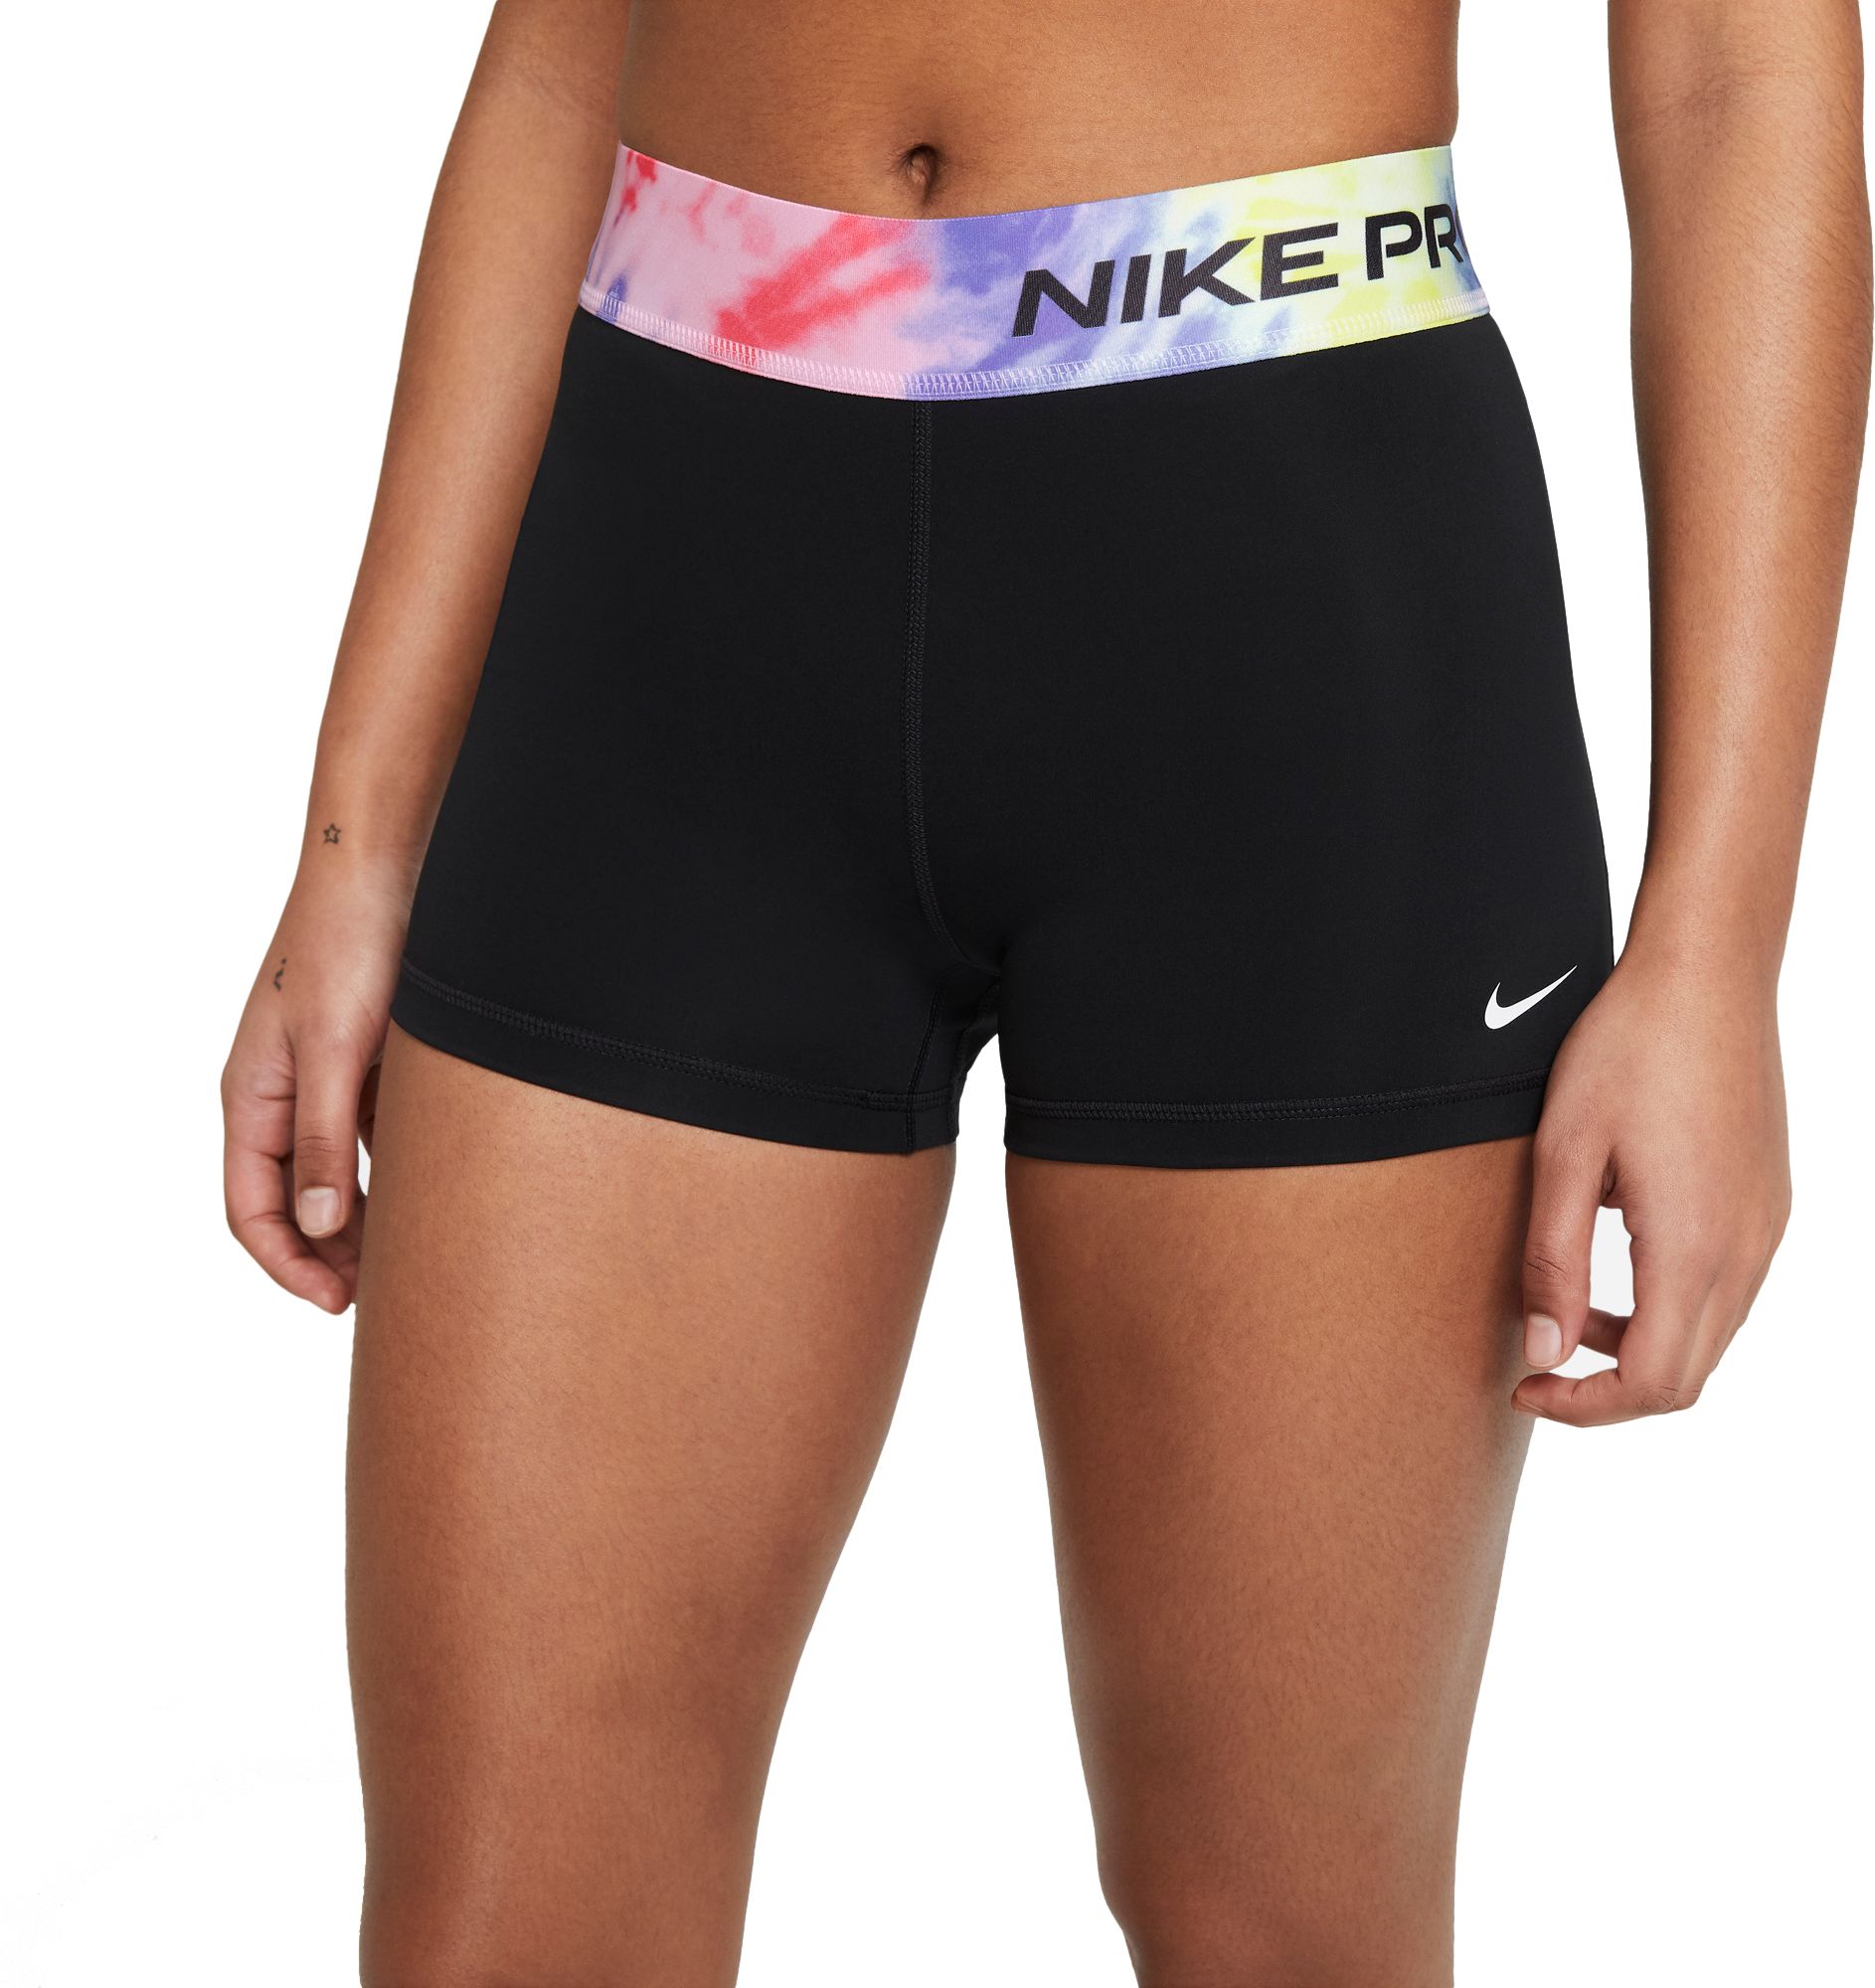 where do they sell nike pros